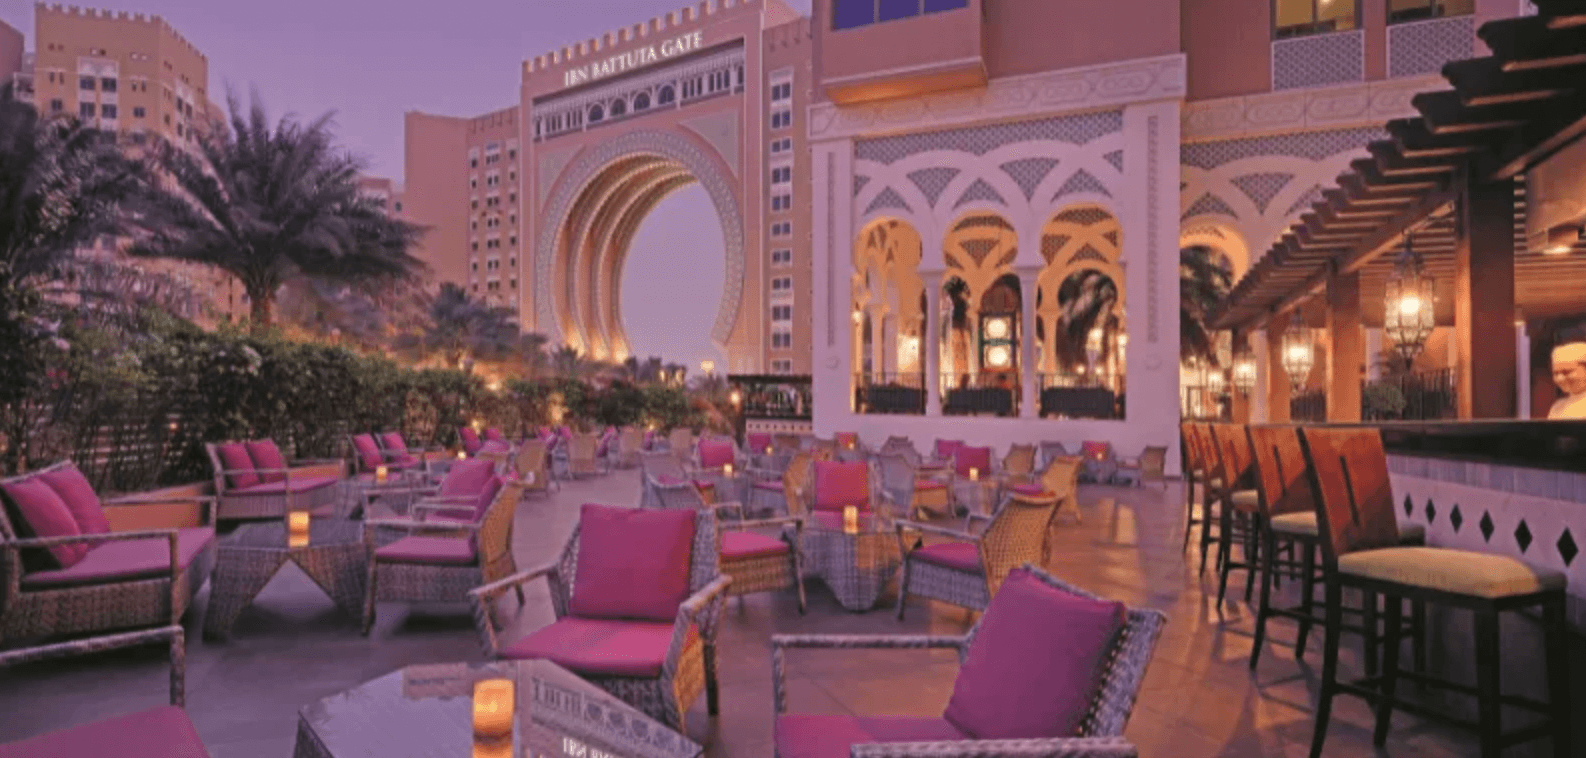 Top 10 Hotels In Dubai With Free Shuttle Service to the Dubai Expo 2020